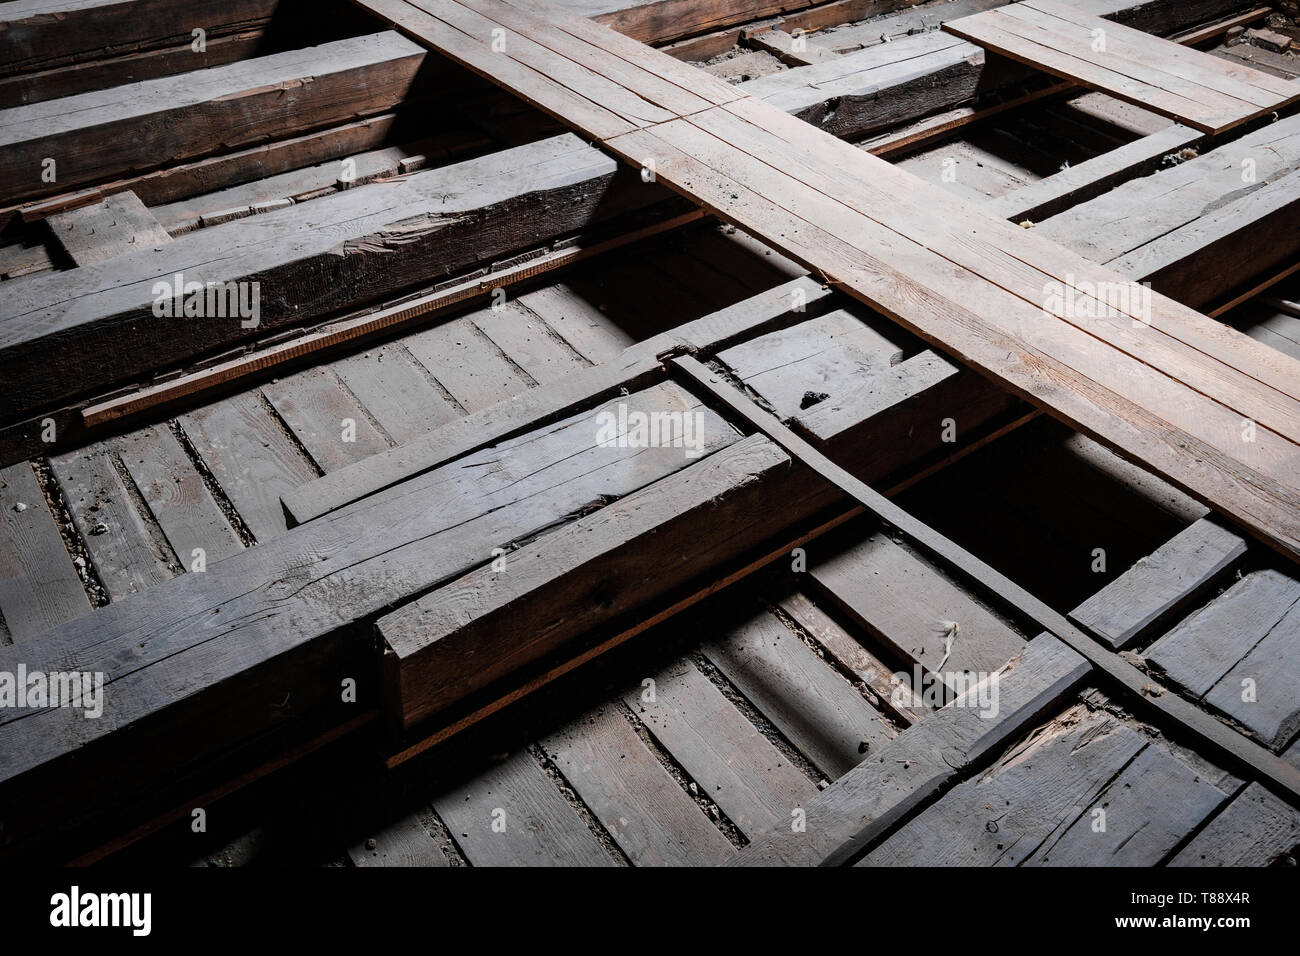 old wooden floor beam and plank construction in attic loft Stock Photo